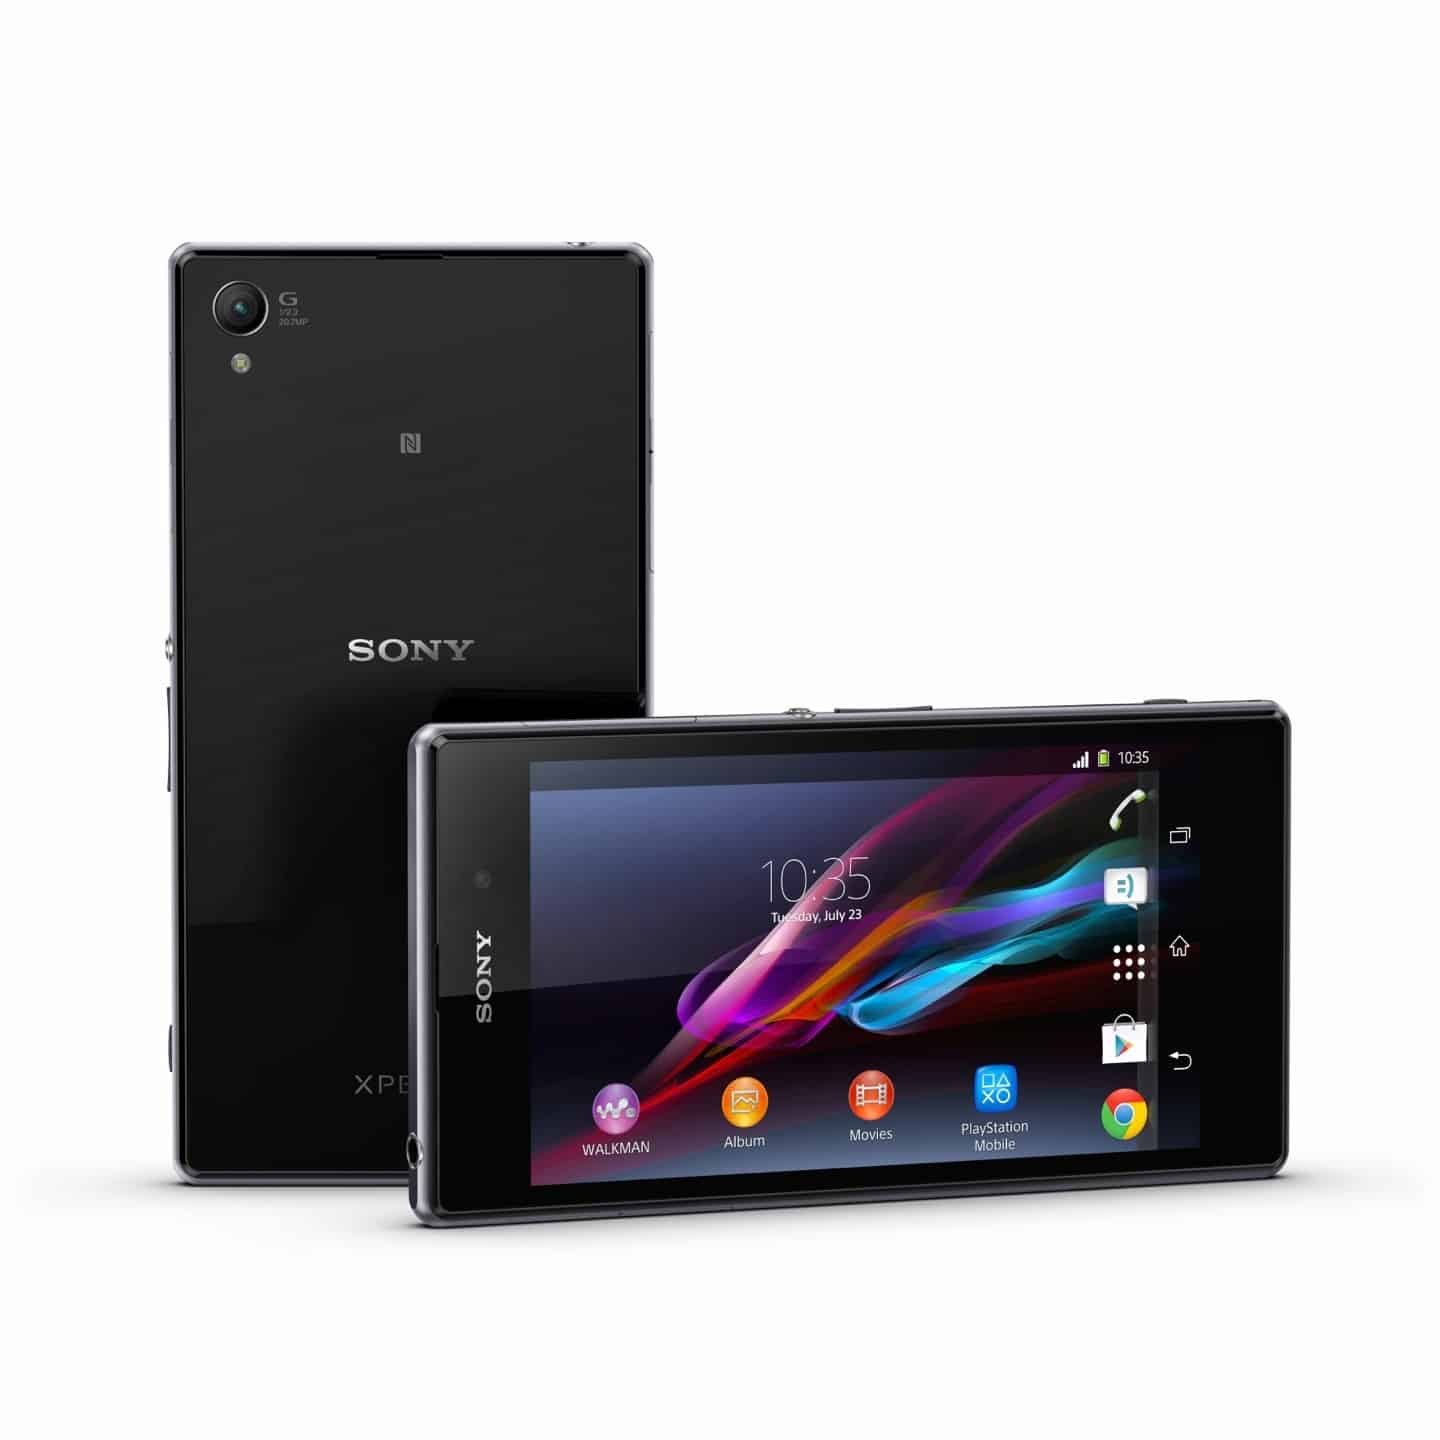 sony-xperia-z1-official-image